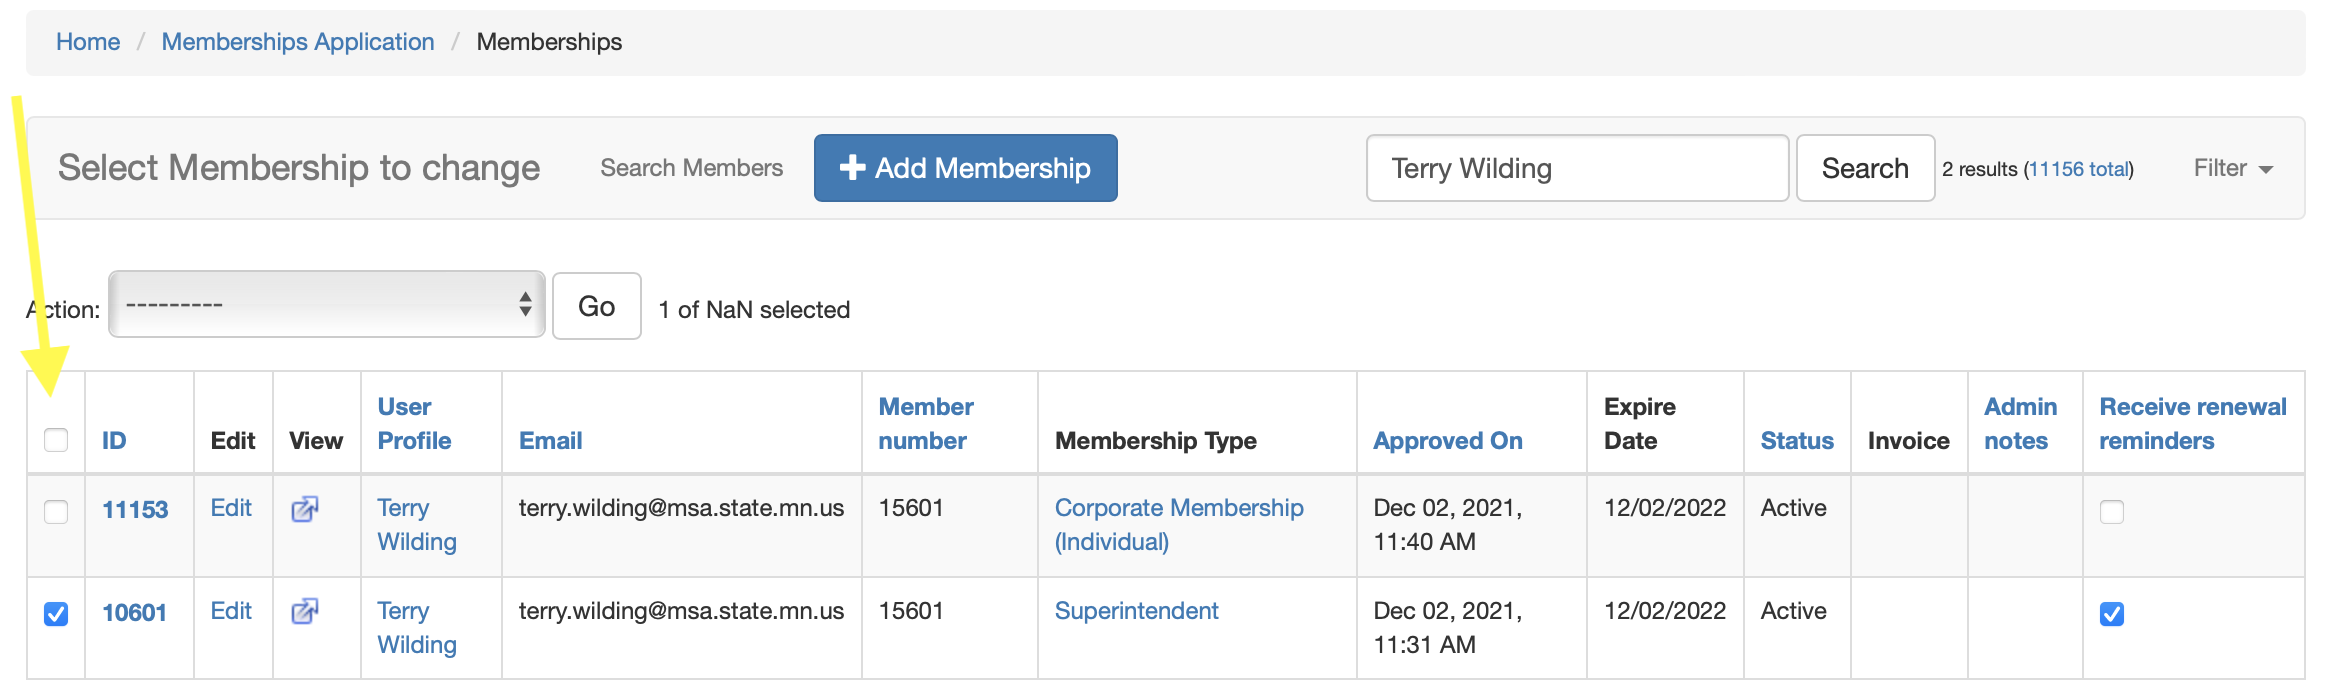 Memberships Admin Console to Manage Members